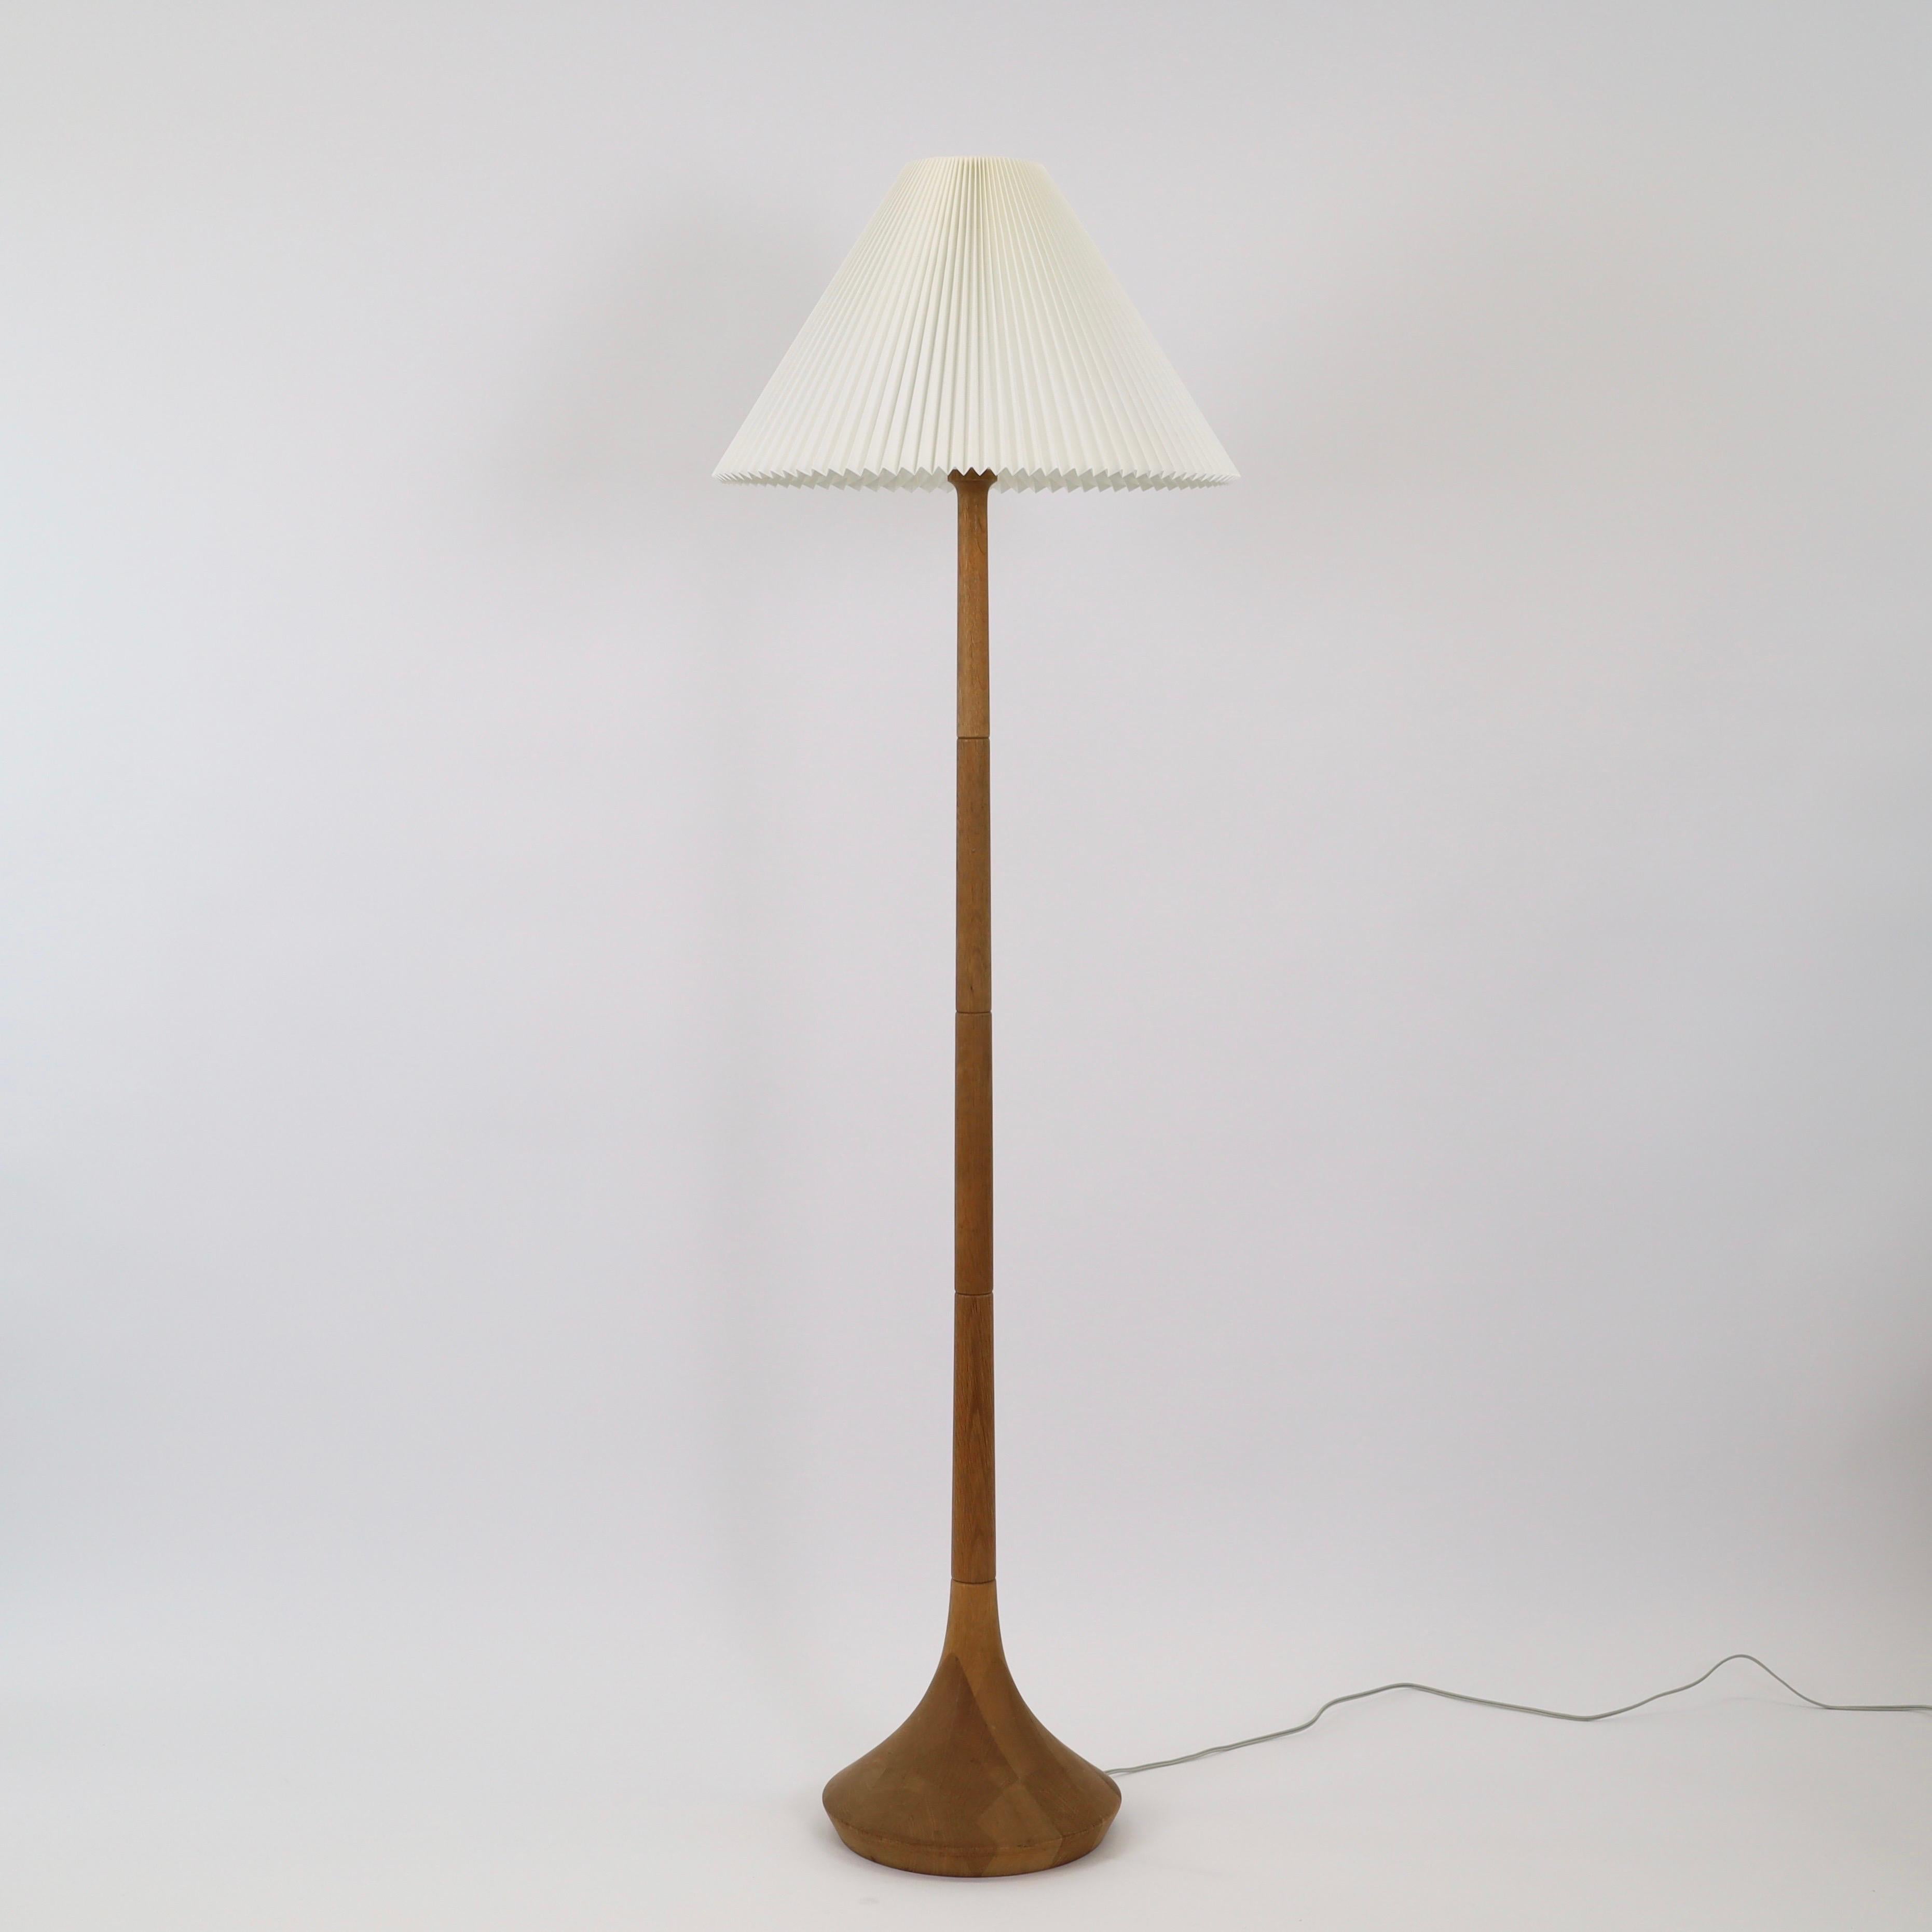 Oak wood floor lamp designed by Lisbeth Brams for Brdr. Krüger in the 1960s with a shade by Le Klint. A modern piece by the Danish designer and example of her extraordinary ability to make timeless lamps. 

* An oak wood floor lamp with a white